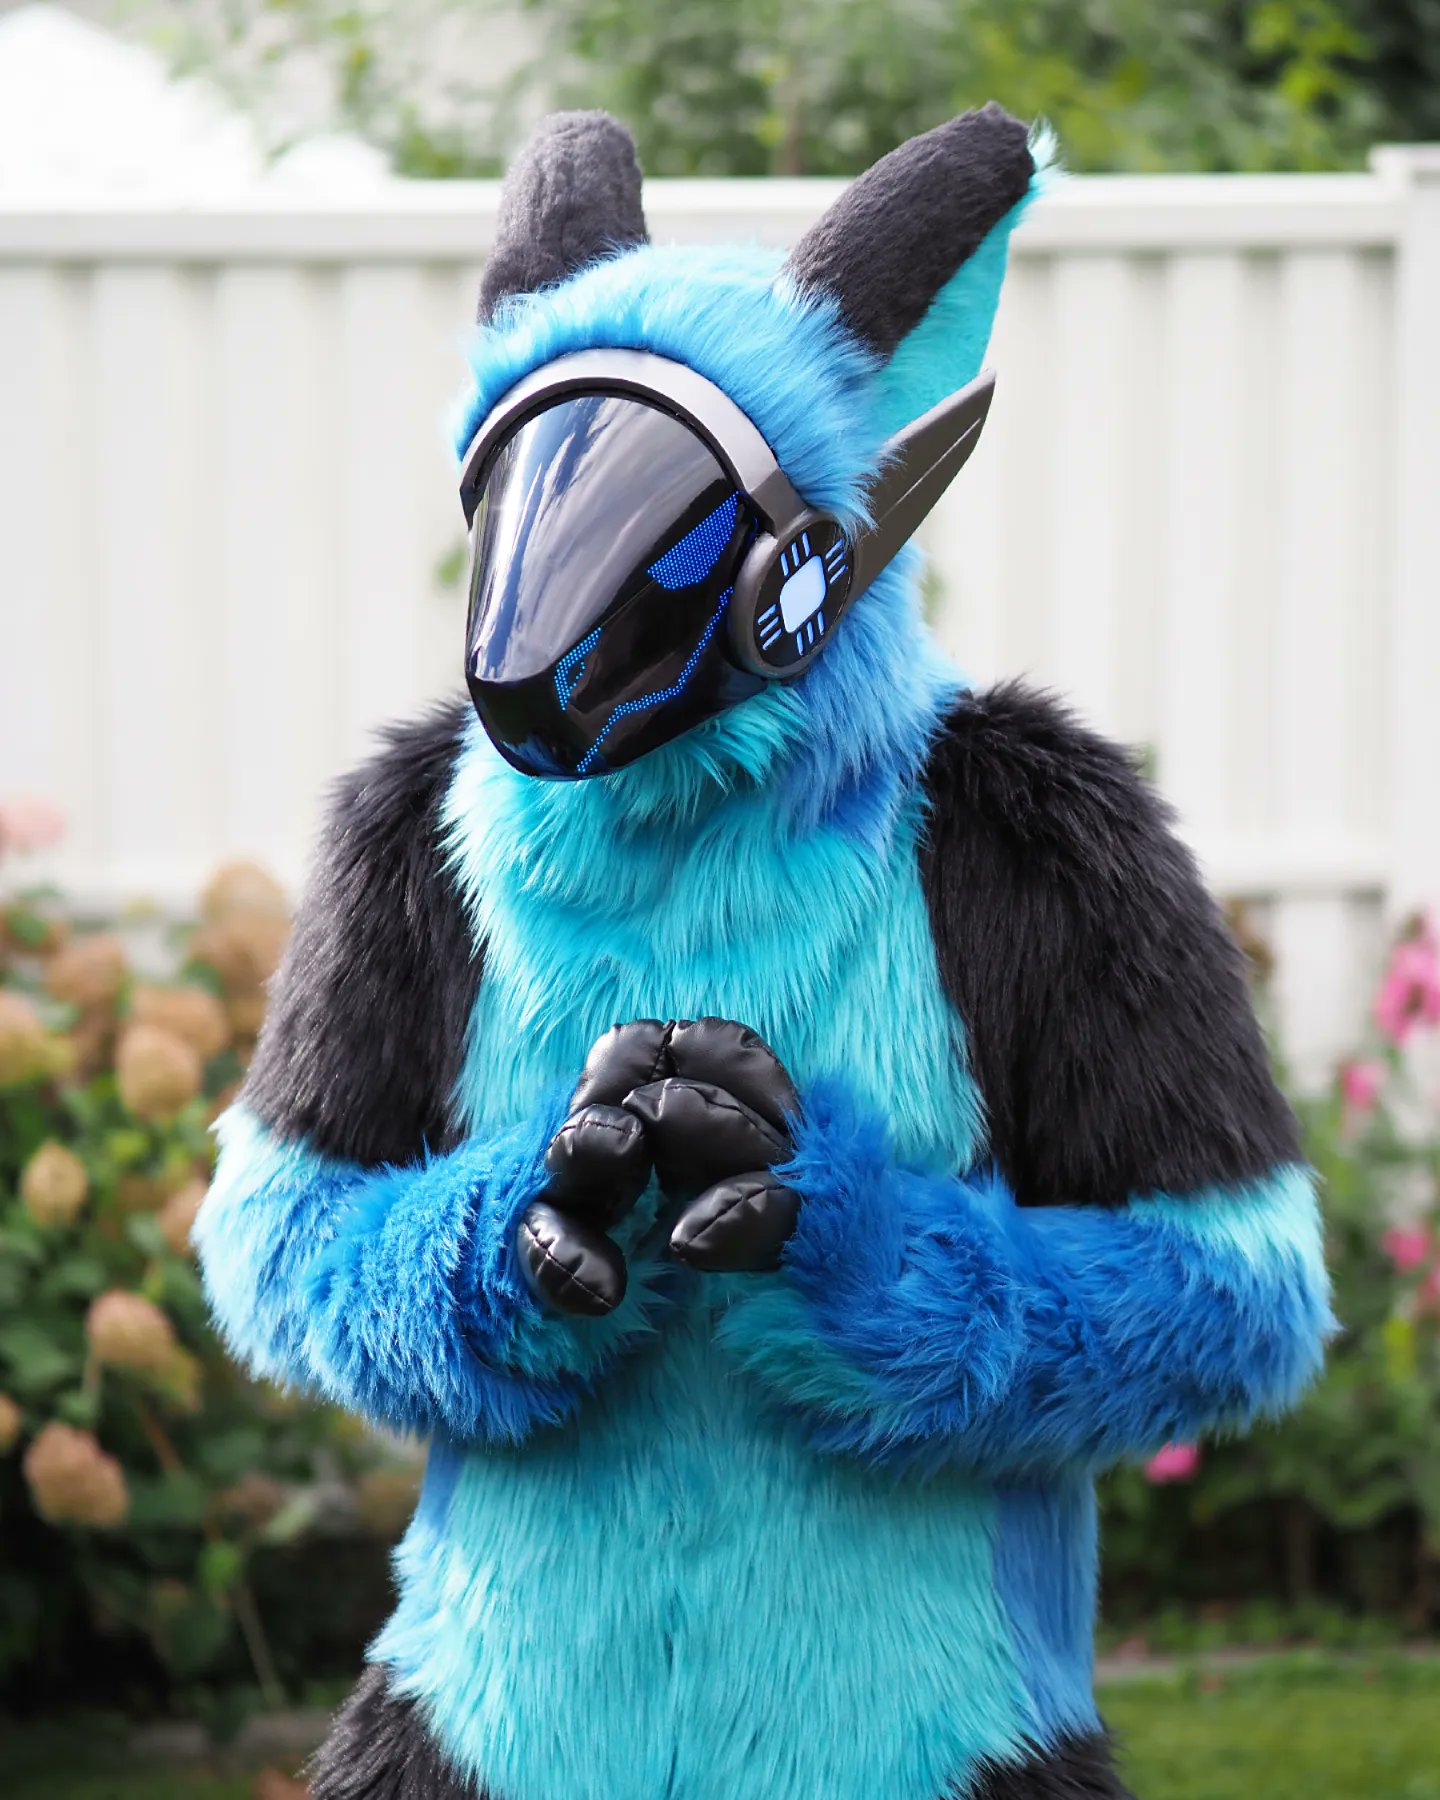 Bitti on X: Feeling cute this #fursuitfriday #furry #fursuit